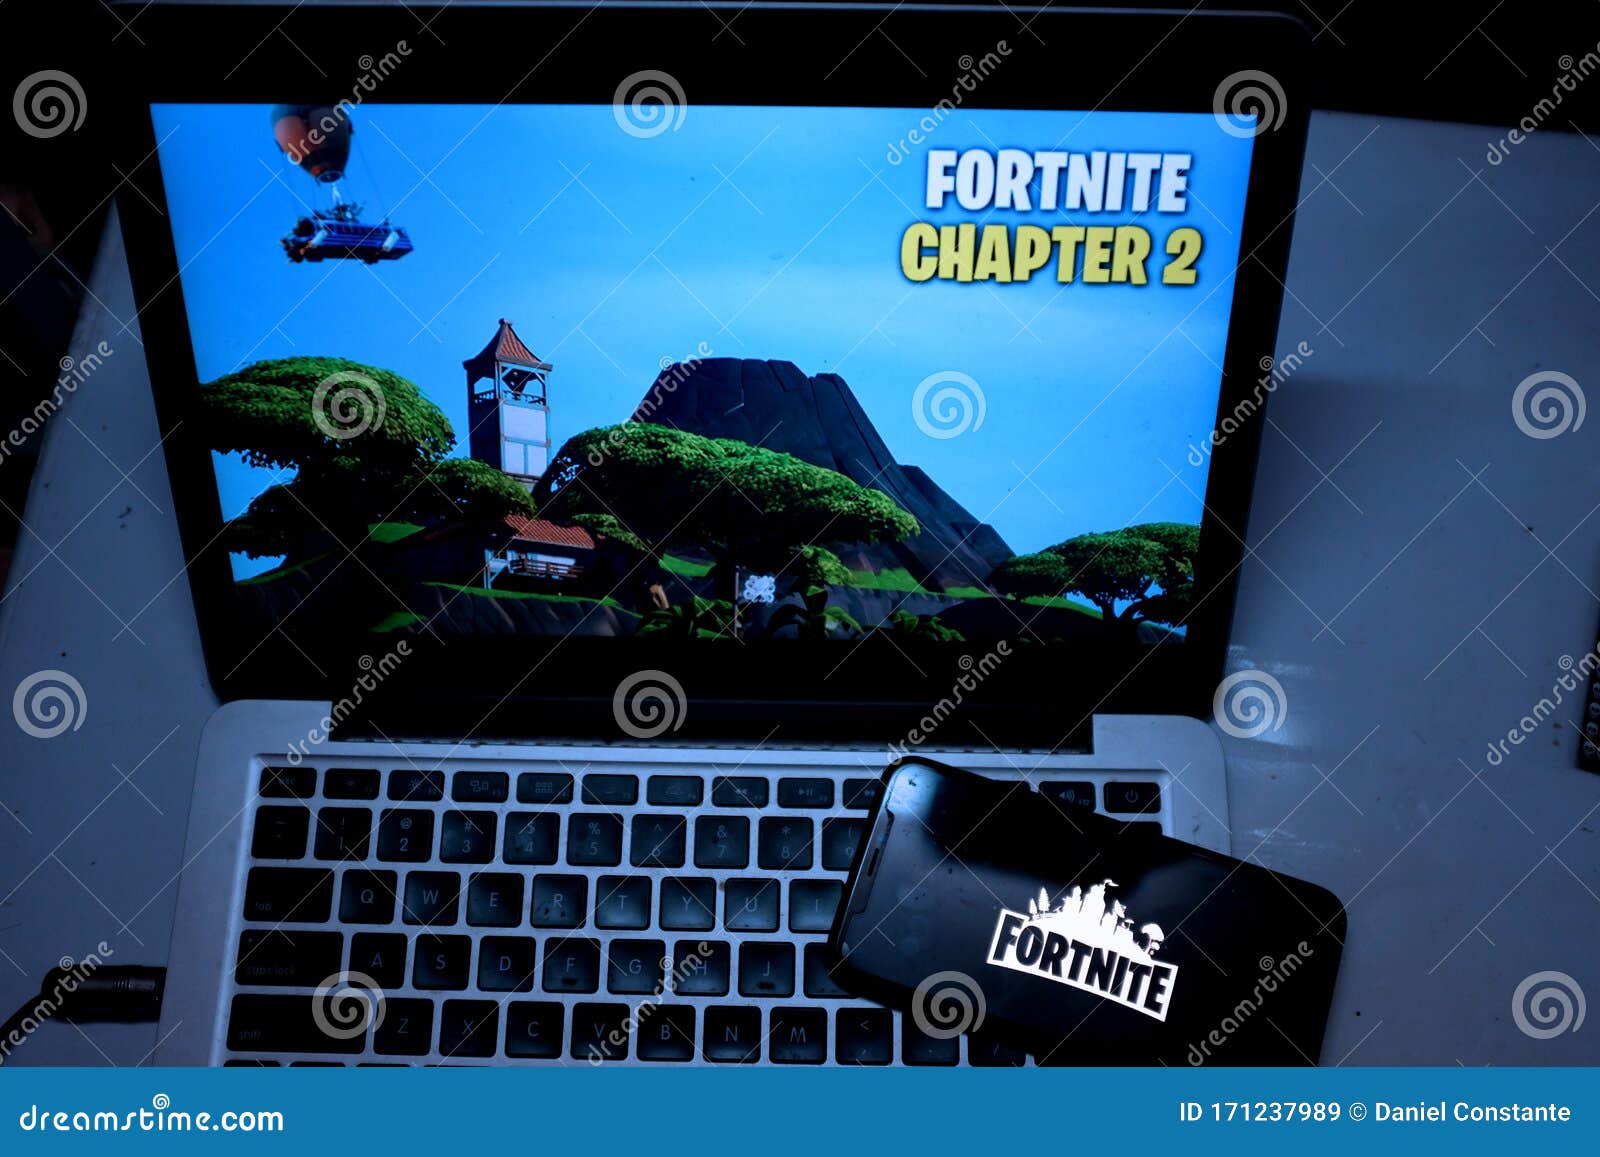 Iphone 11 Pro And Macbook With The Fortnite 2 Logo Fortnite Editorial Stock Image Image Of Hobby Digital 171237989